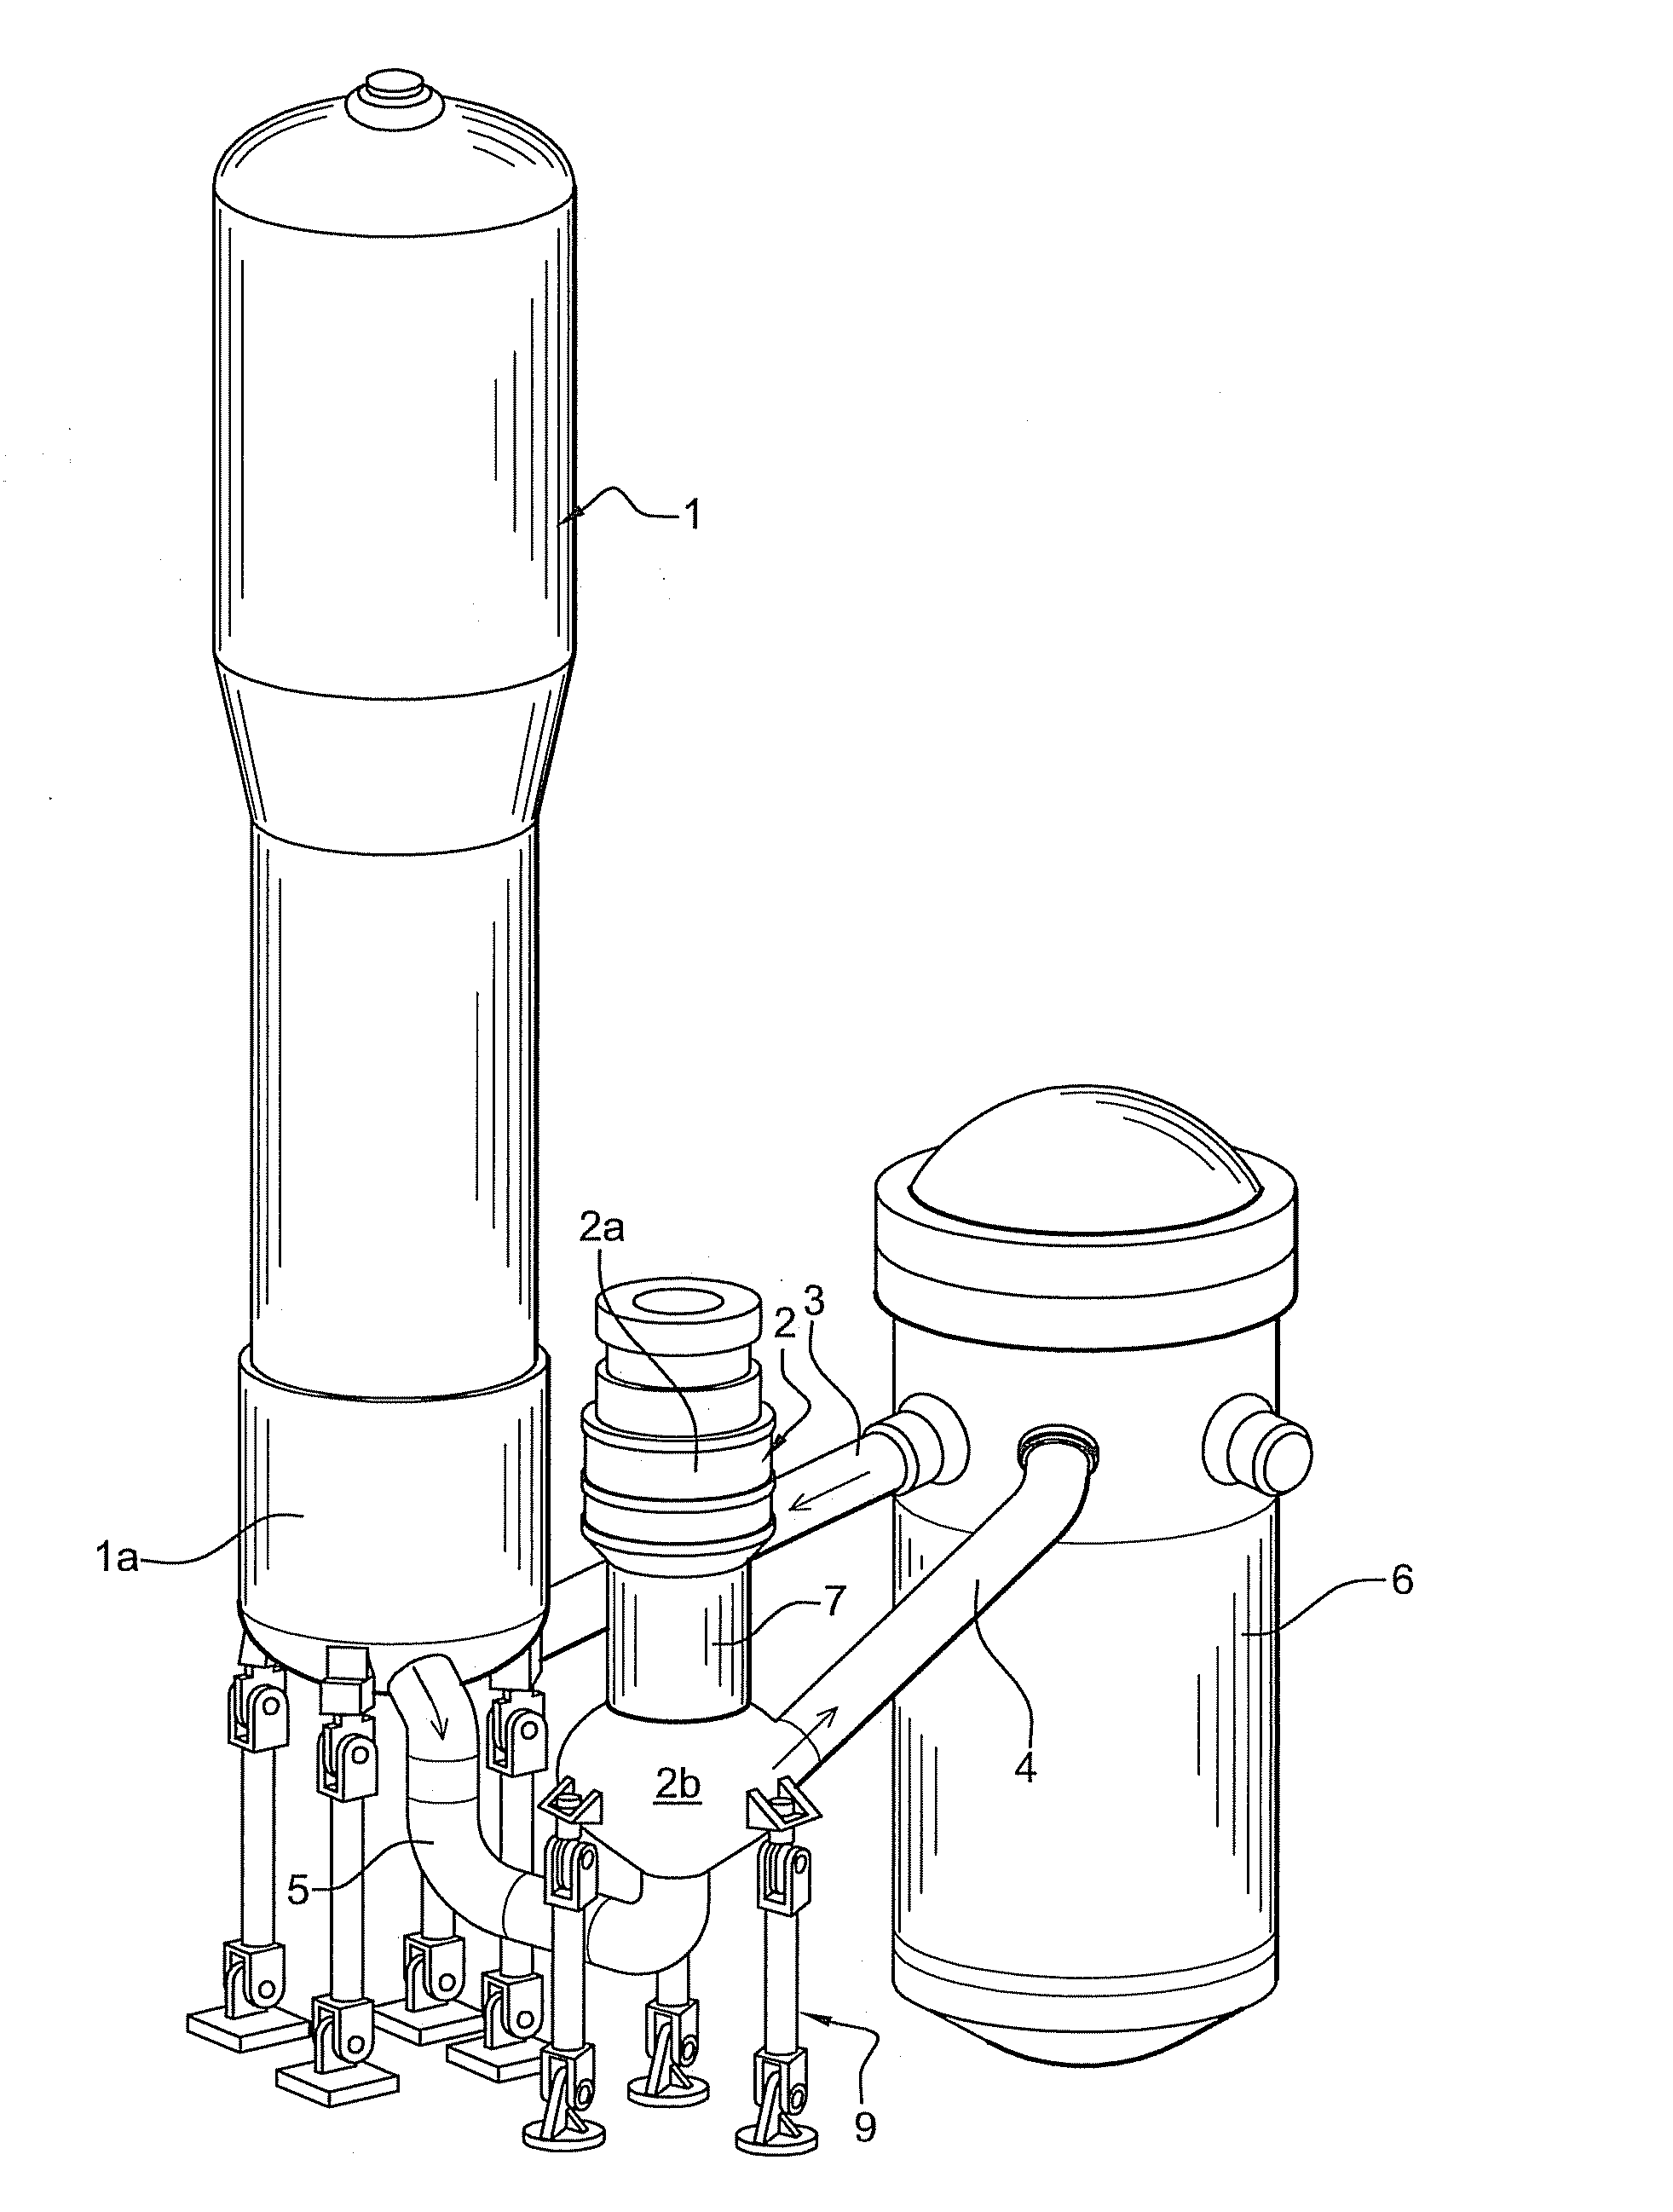 Motor stand of a primary motor-driven pump unit of a pressurized water nuclear reactor